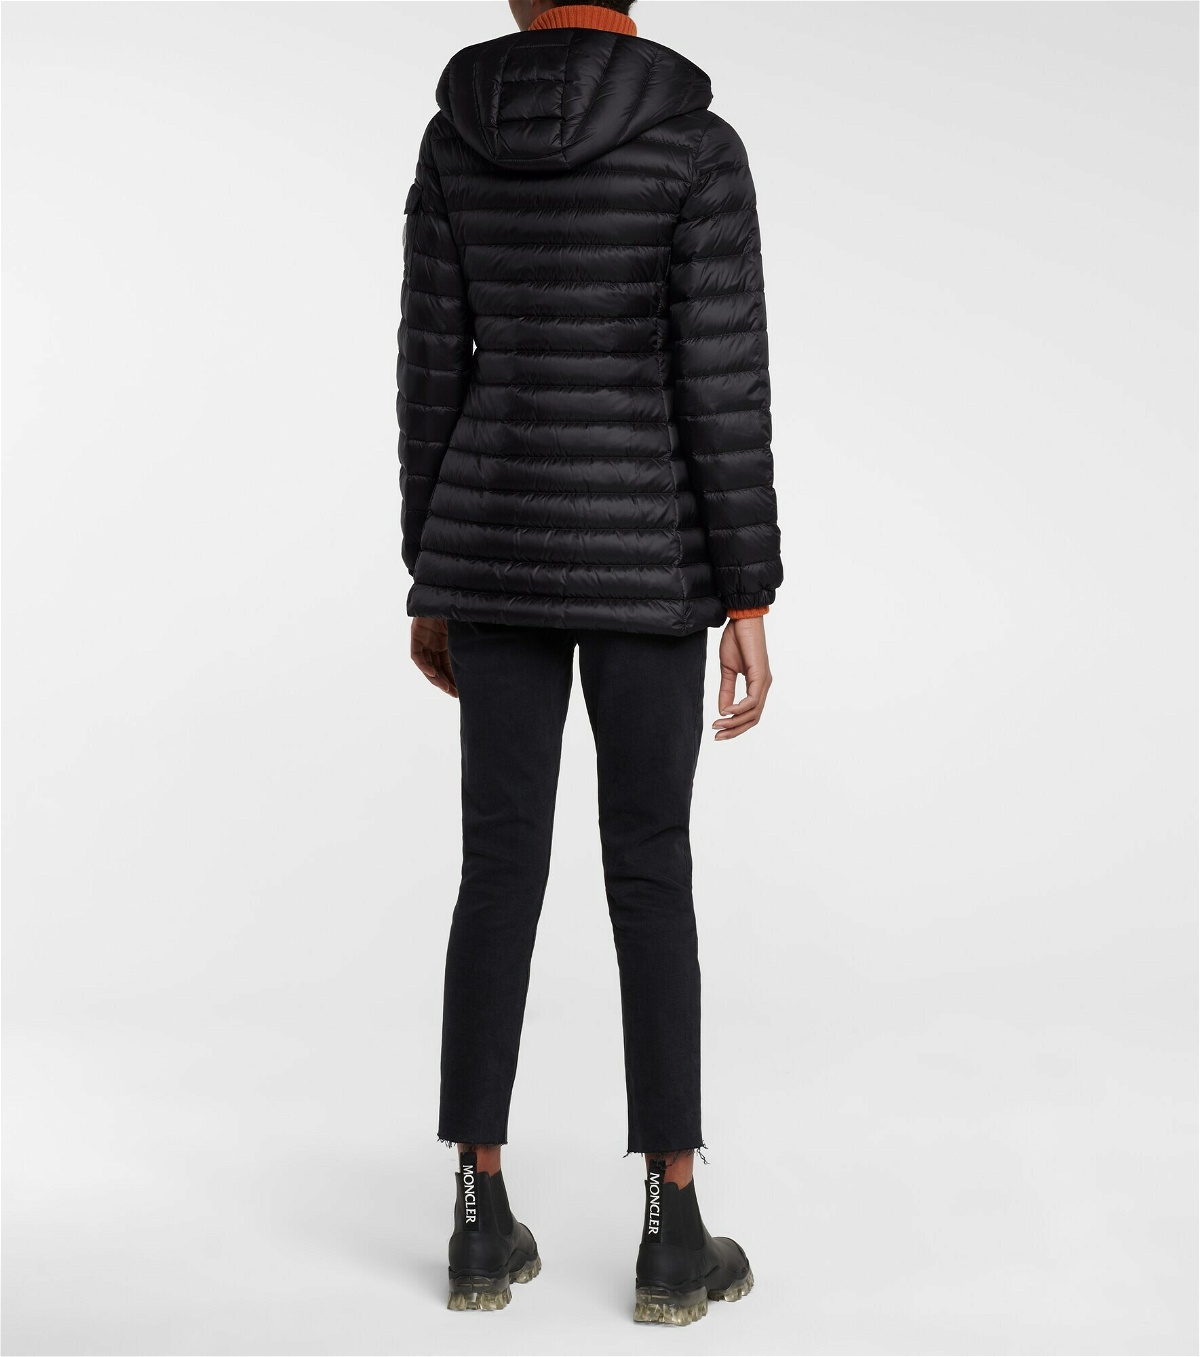 Moncler - Ments quilted down jacket Moncler